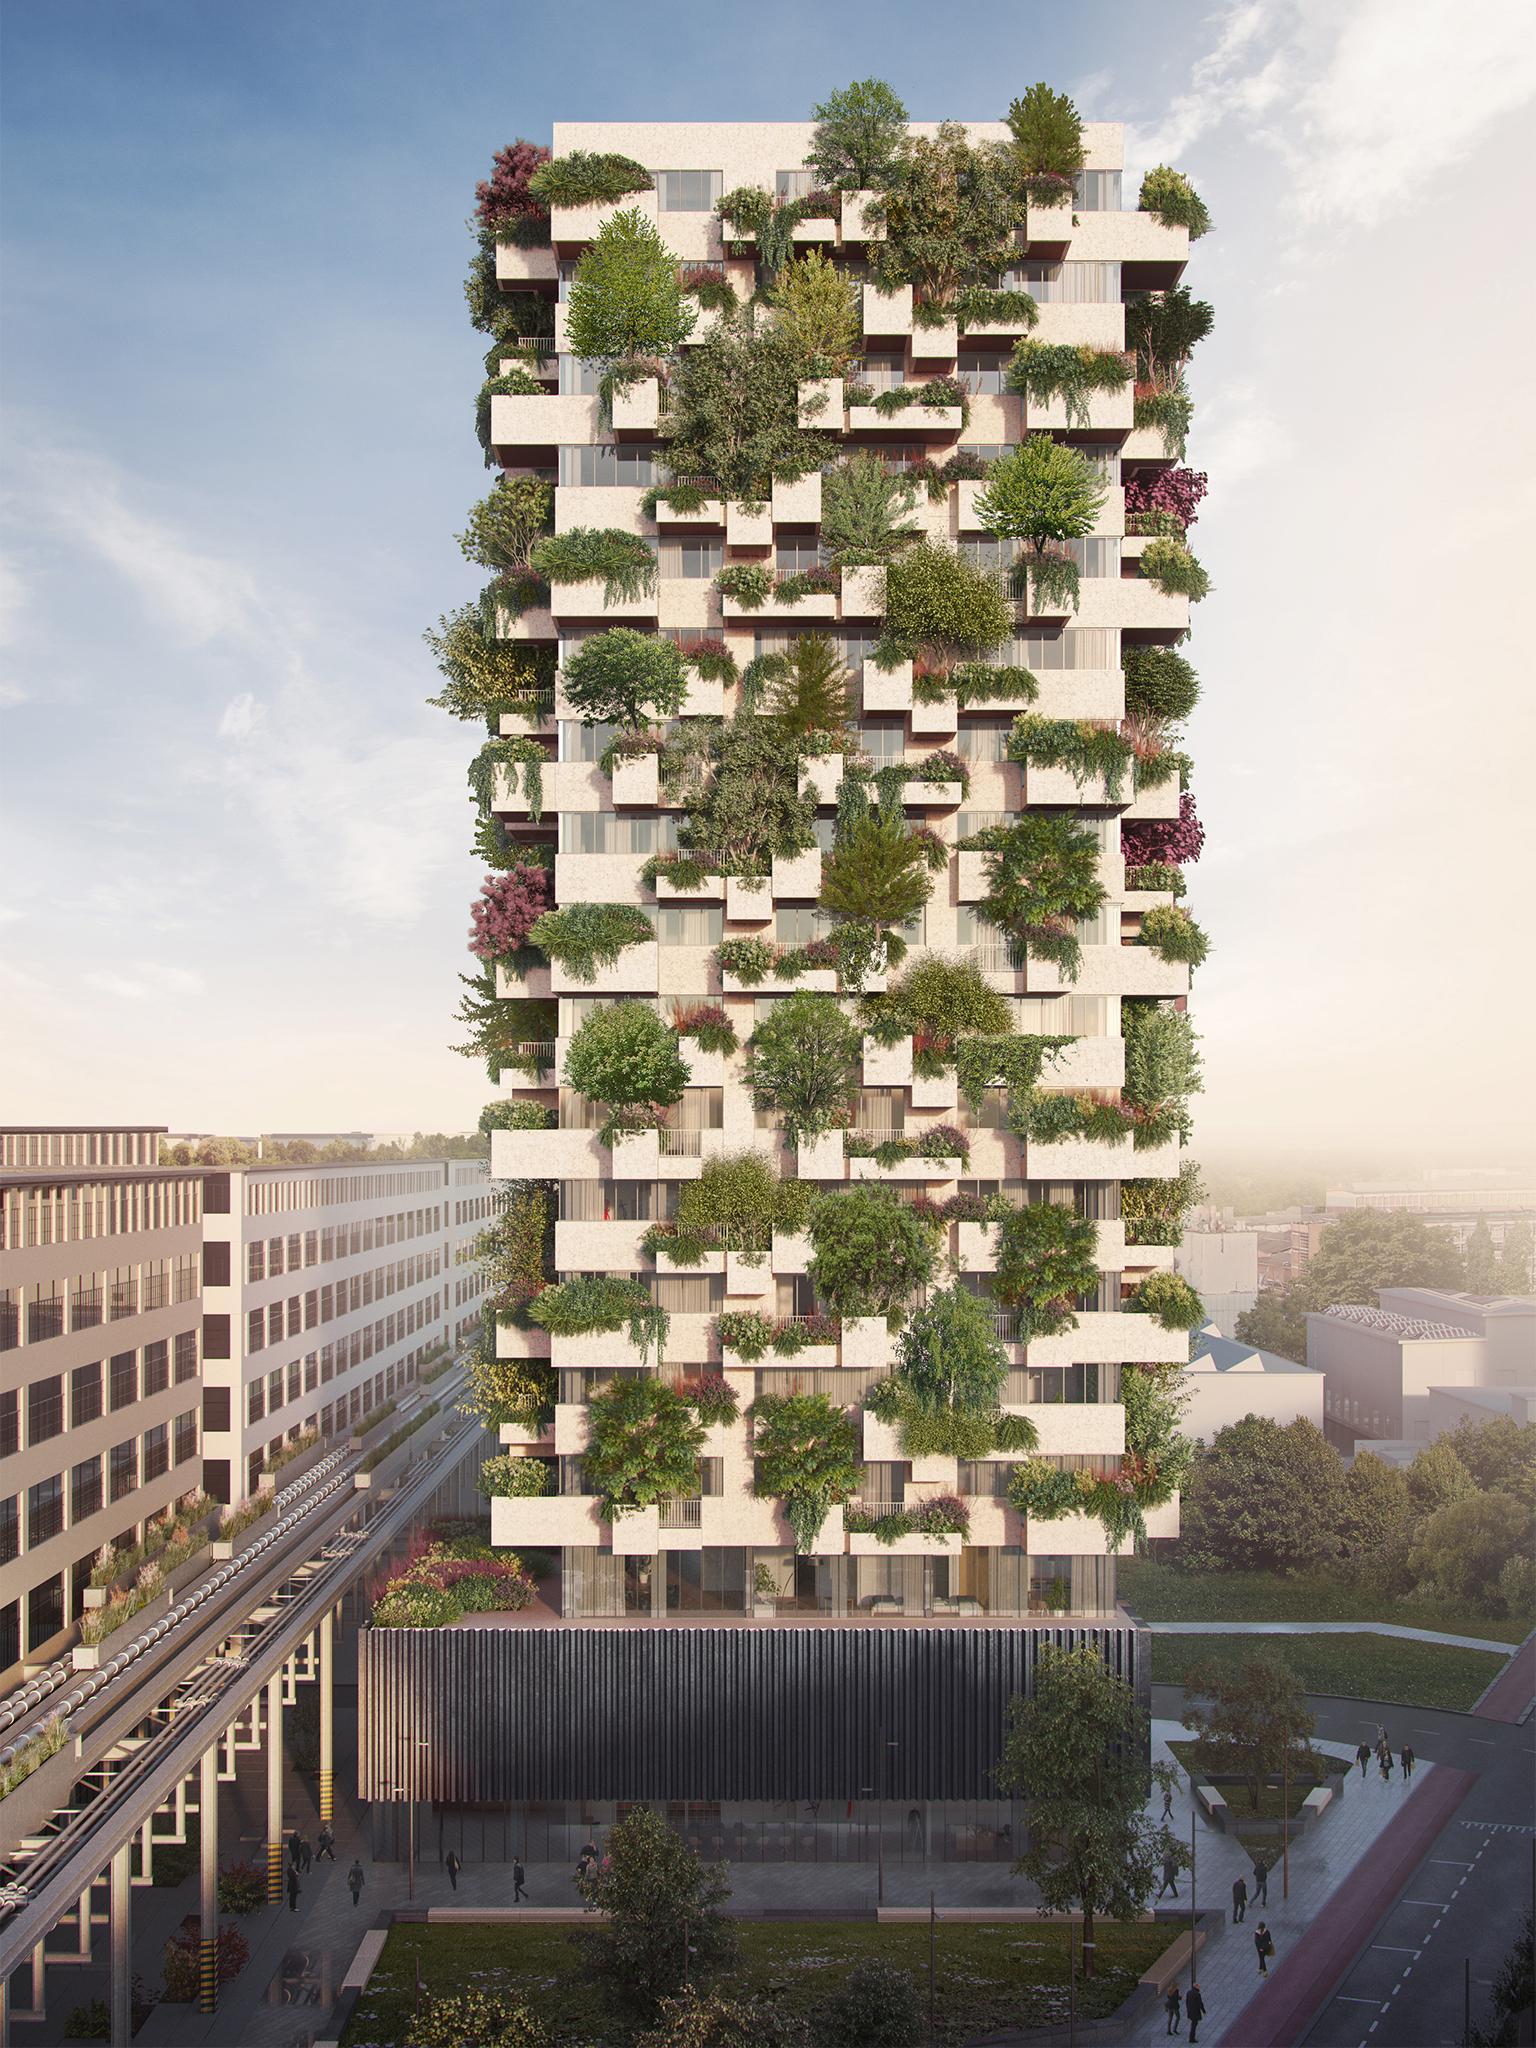 The Trudo Vertical Forst is the first to be adopted by a social housing project